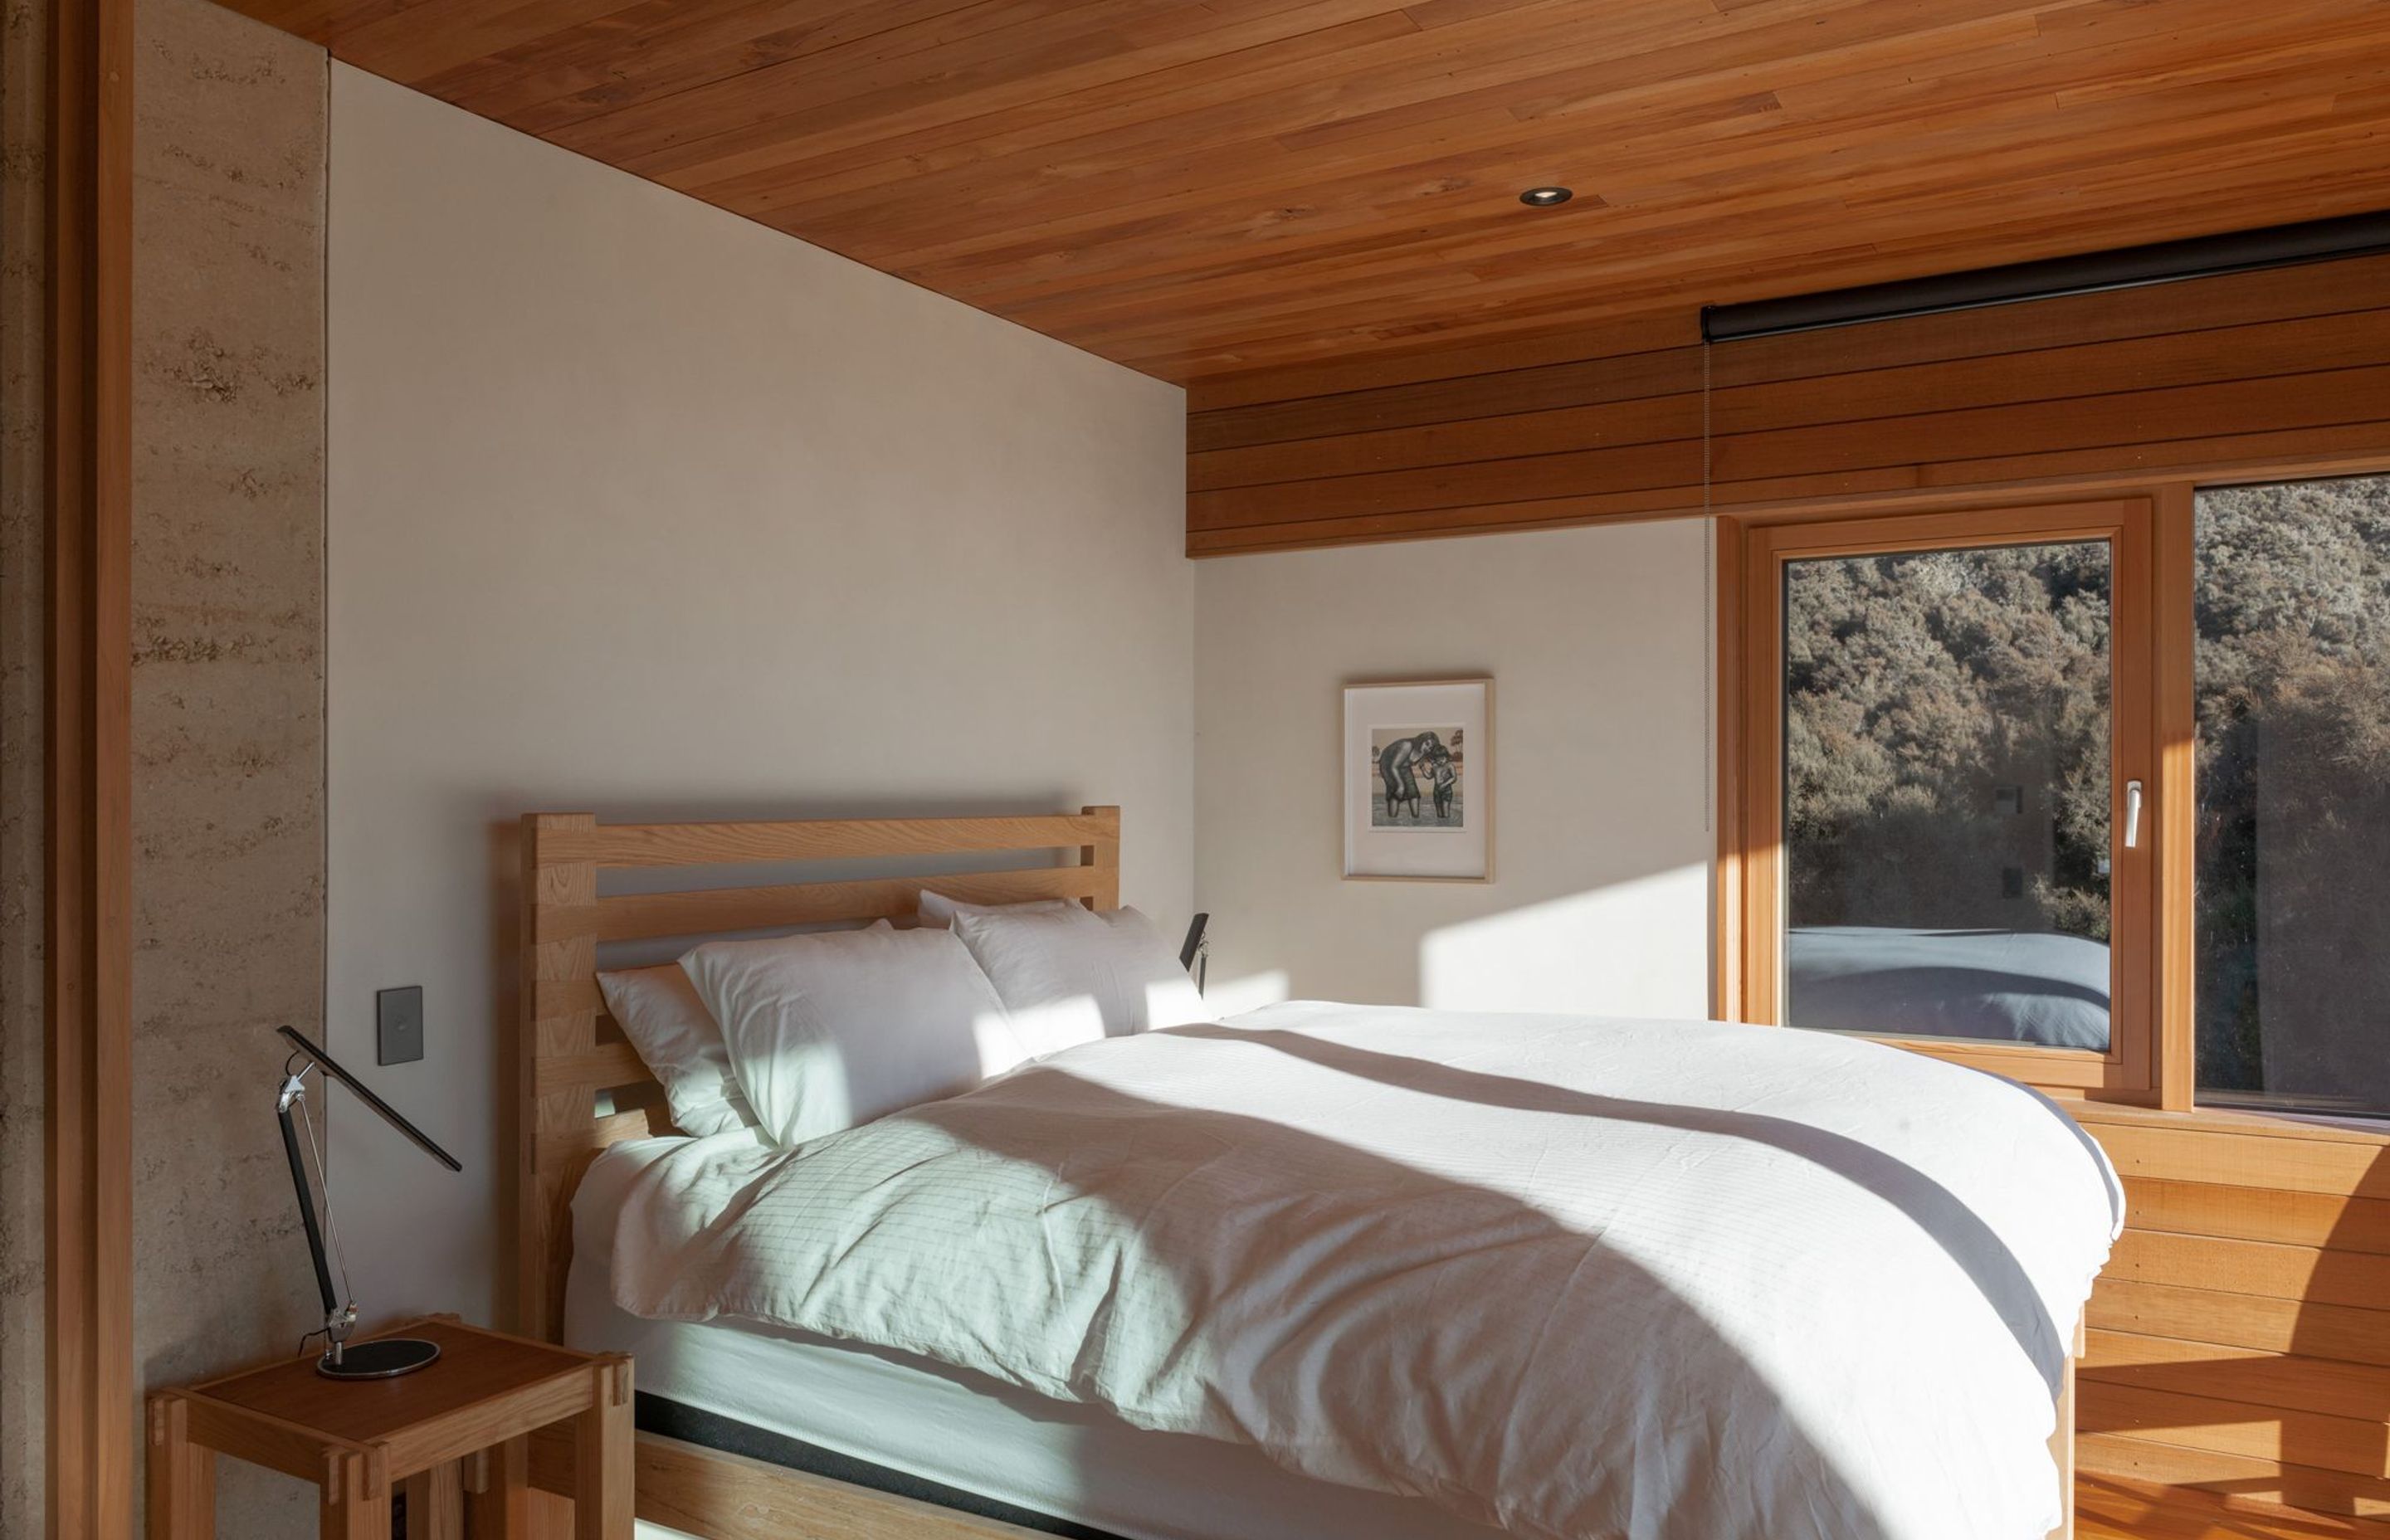 The main bedroom suite is contained within the lower form at the southern-most boundary of the home and like the rest of the home, features a very pared back, natural palette.